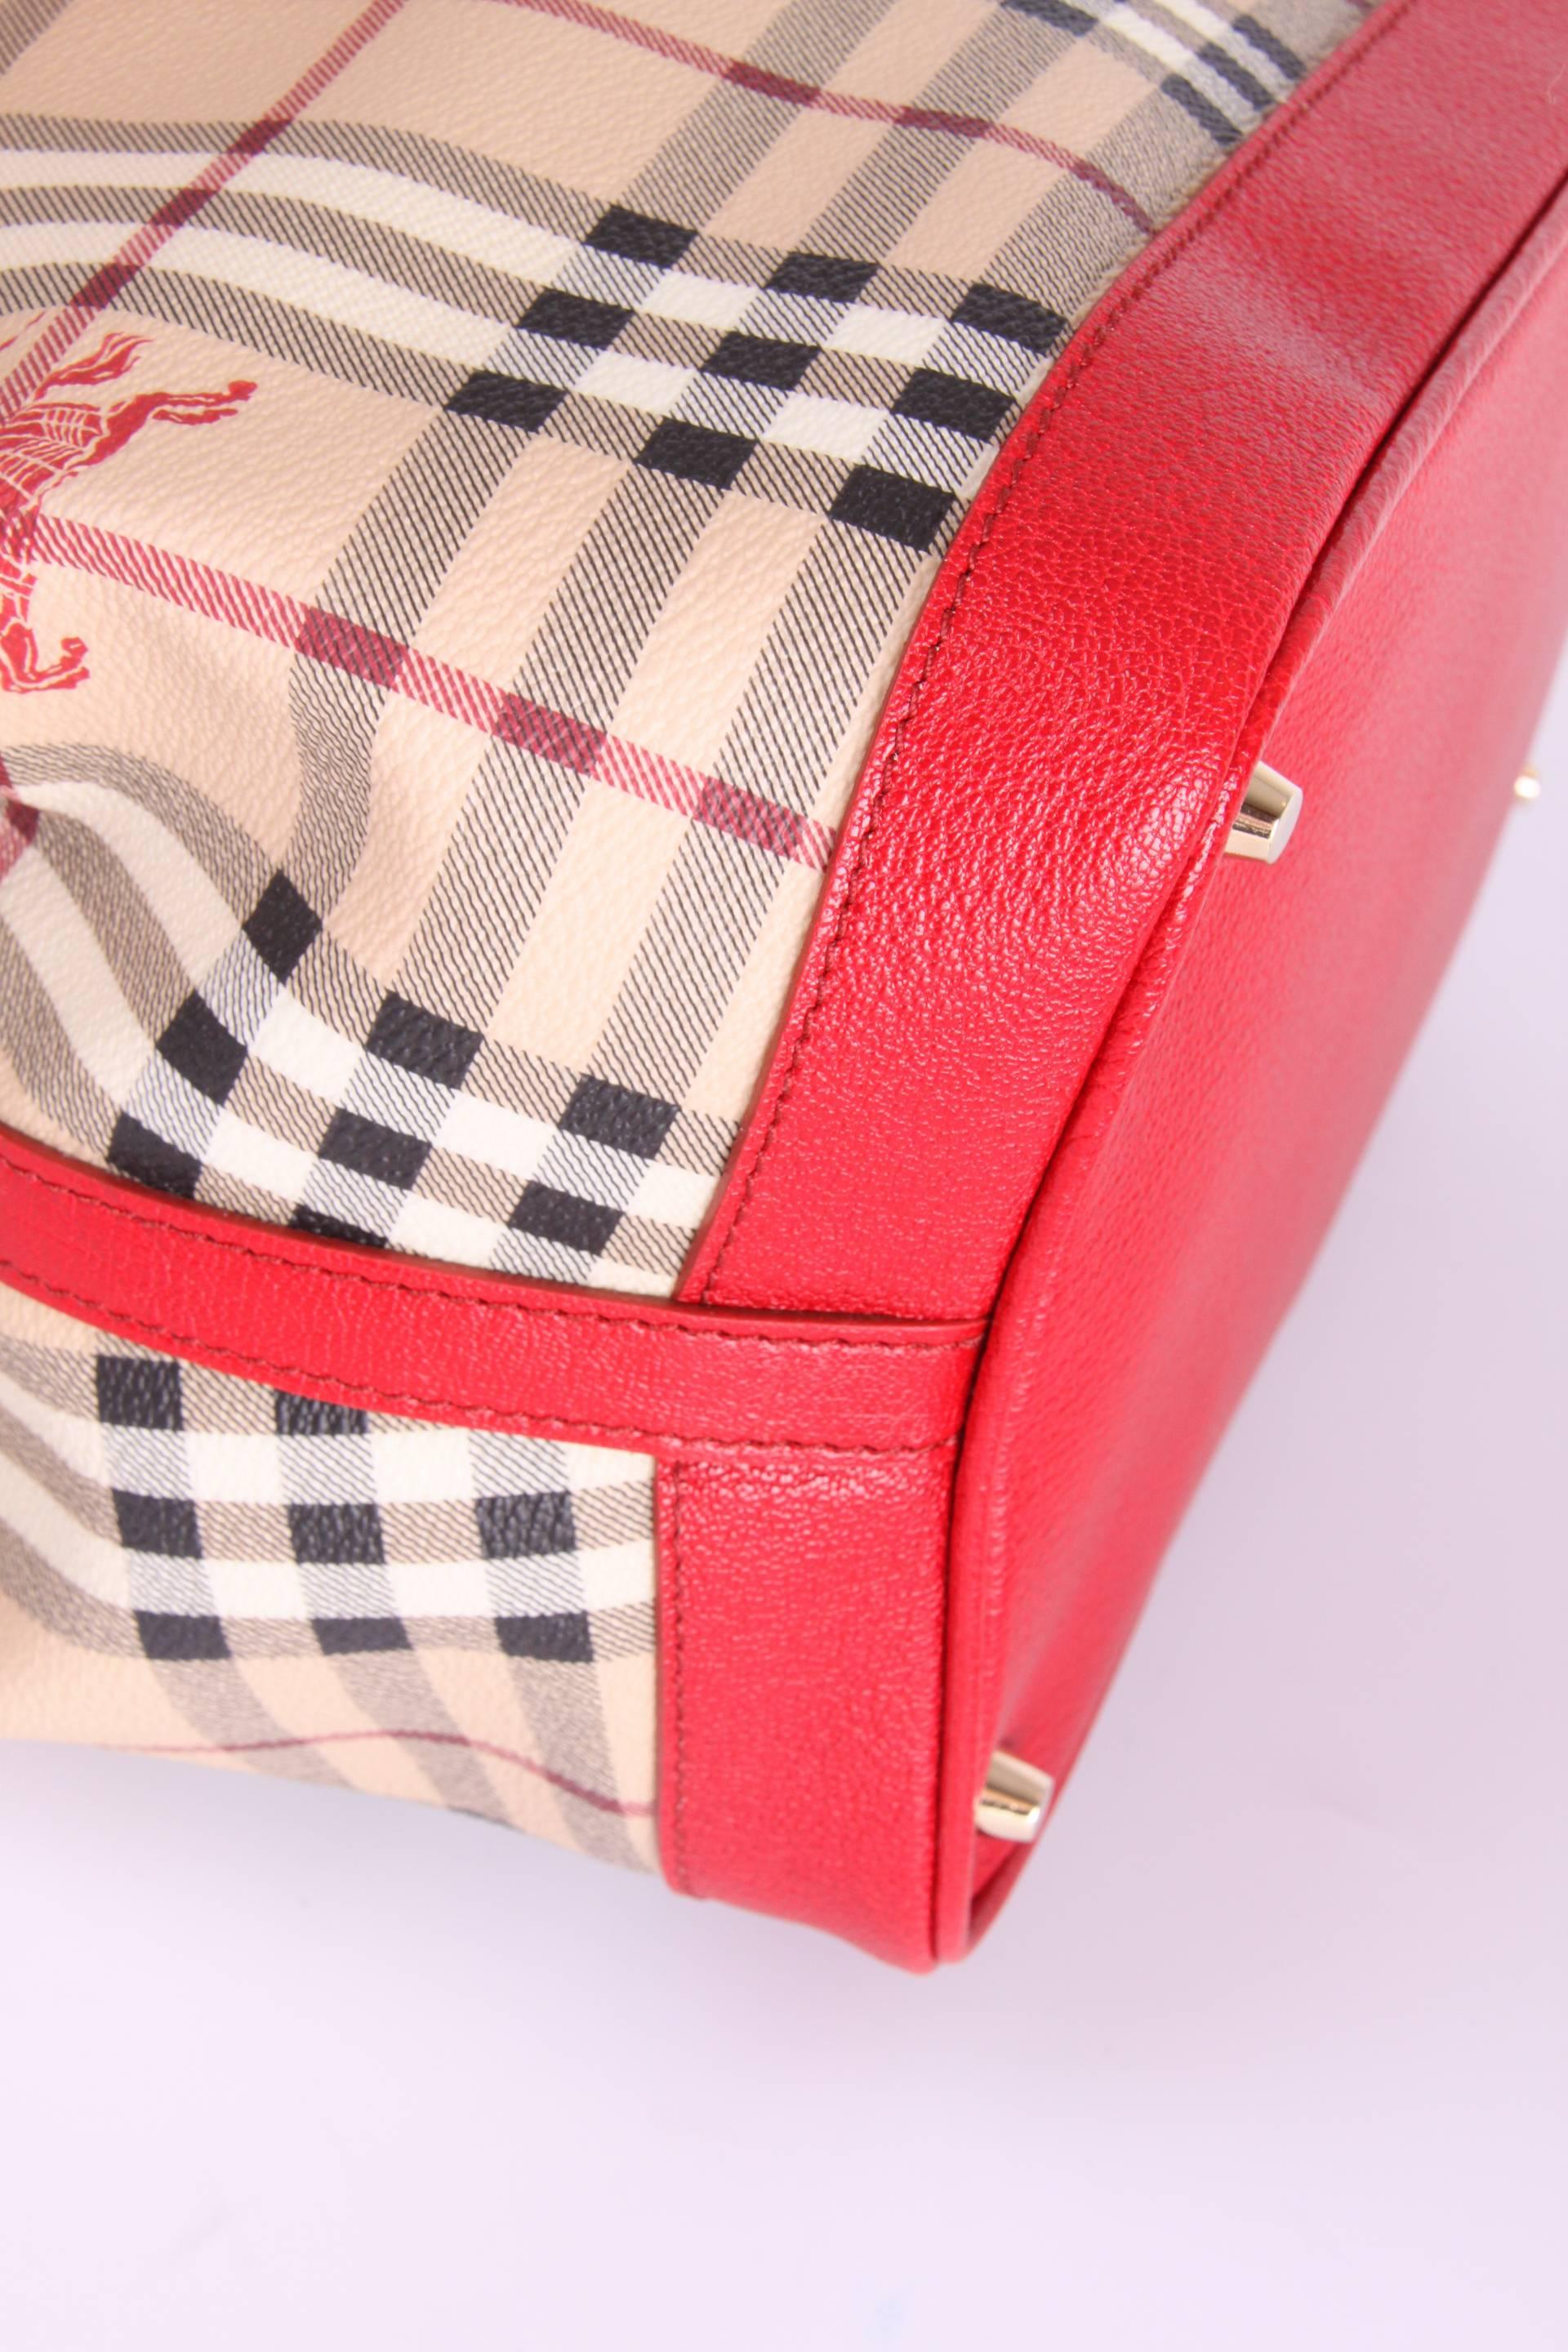 Burberry Checkered Top Handle Bag - red/beige/black/white 1